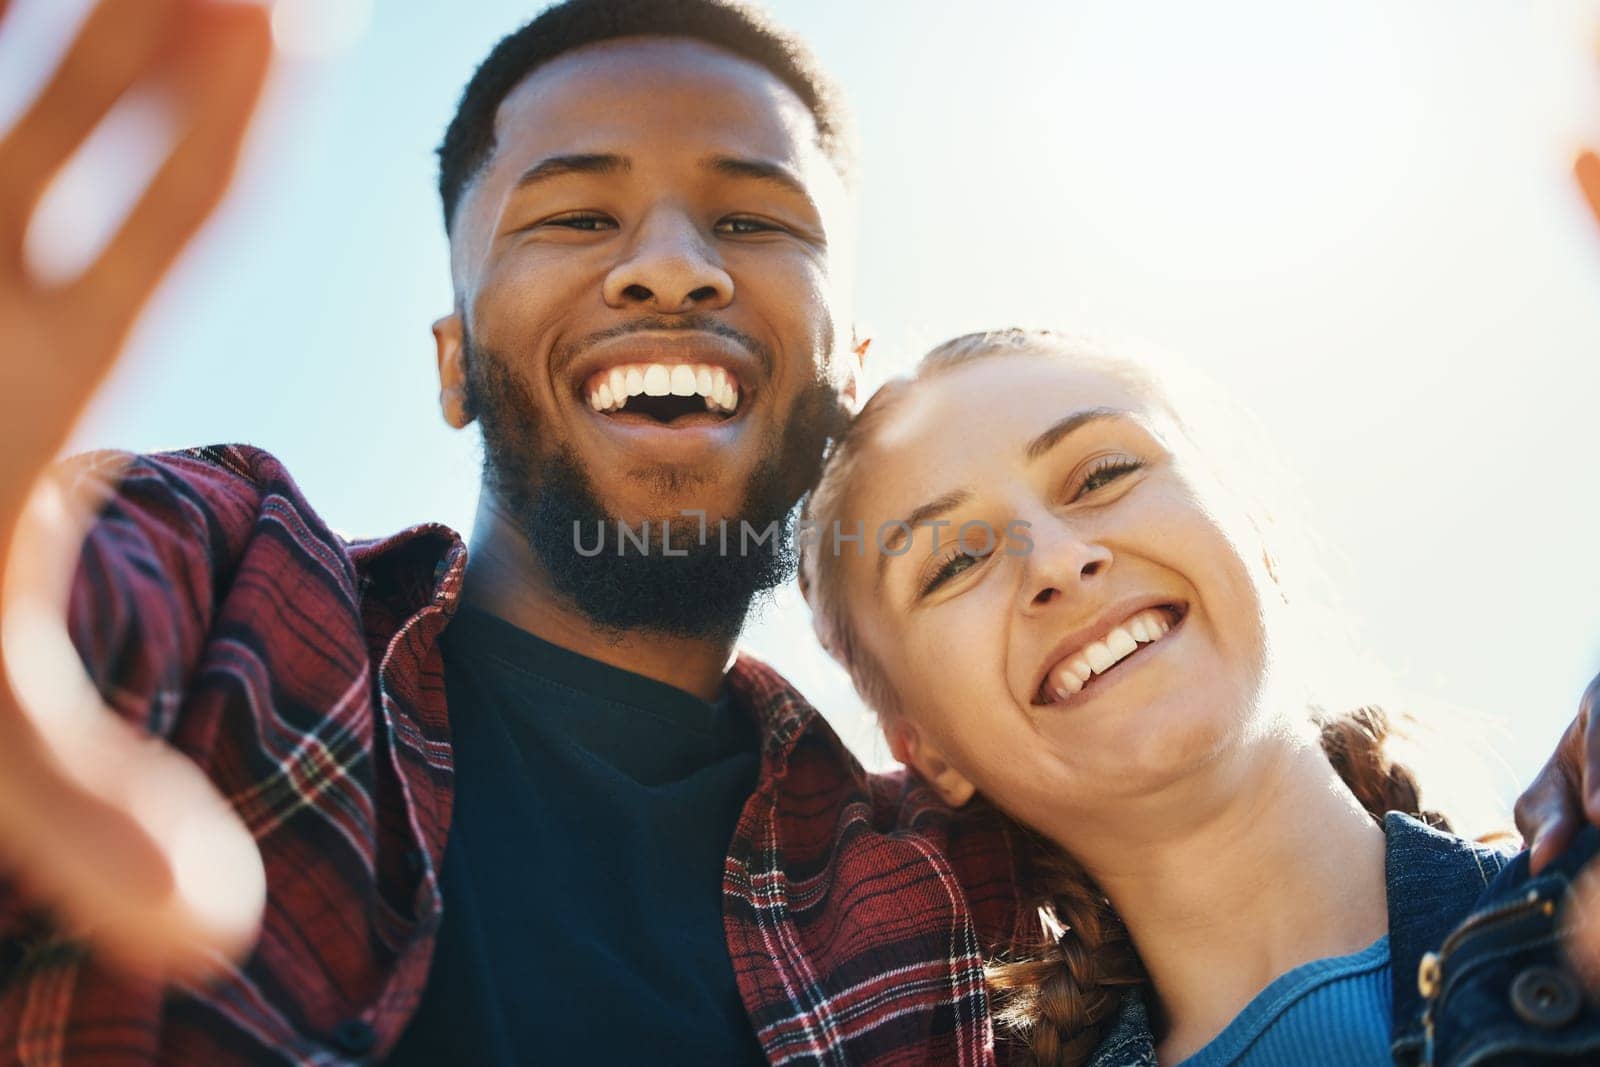 Interracial love, couple selfie and laughing at funny joke outdoors, having fun or bonding in low angle. Comic smile, romance portrait and black man and woman take pictures for happy memory together.